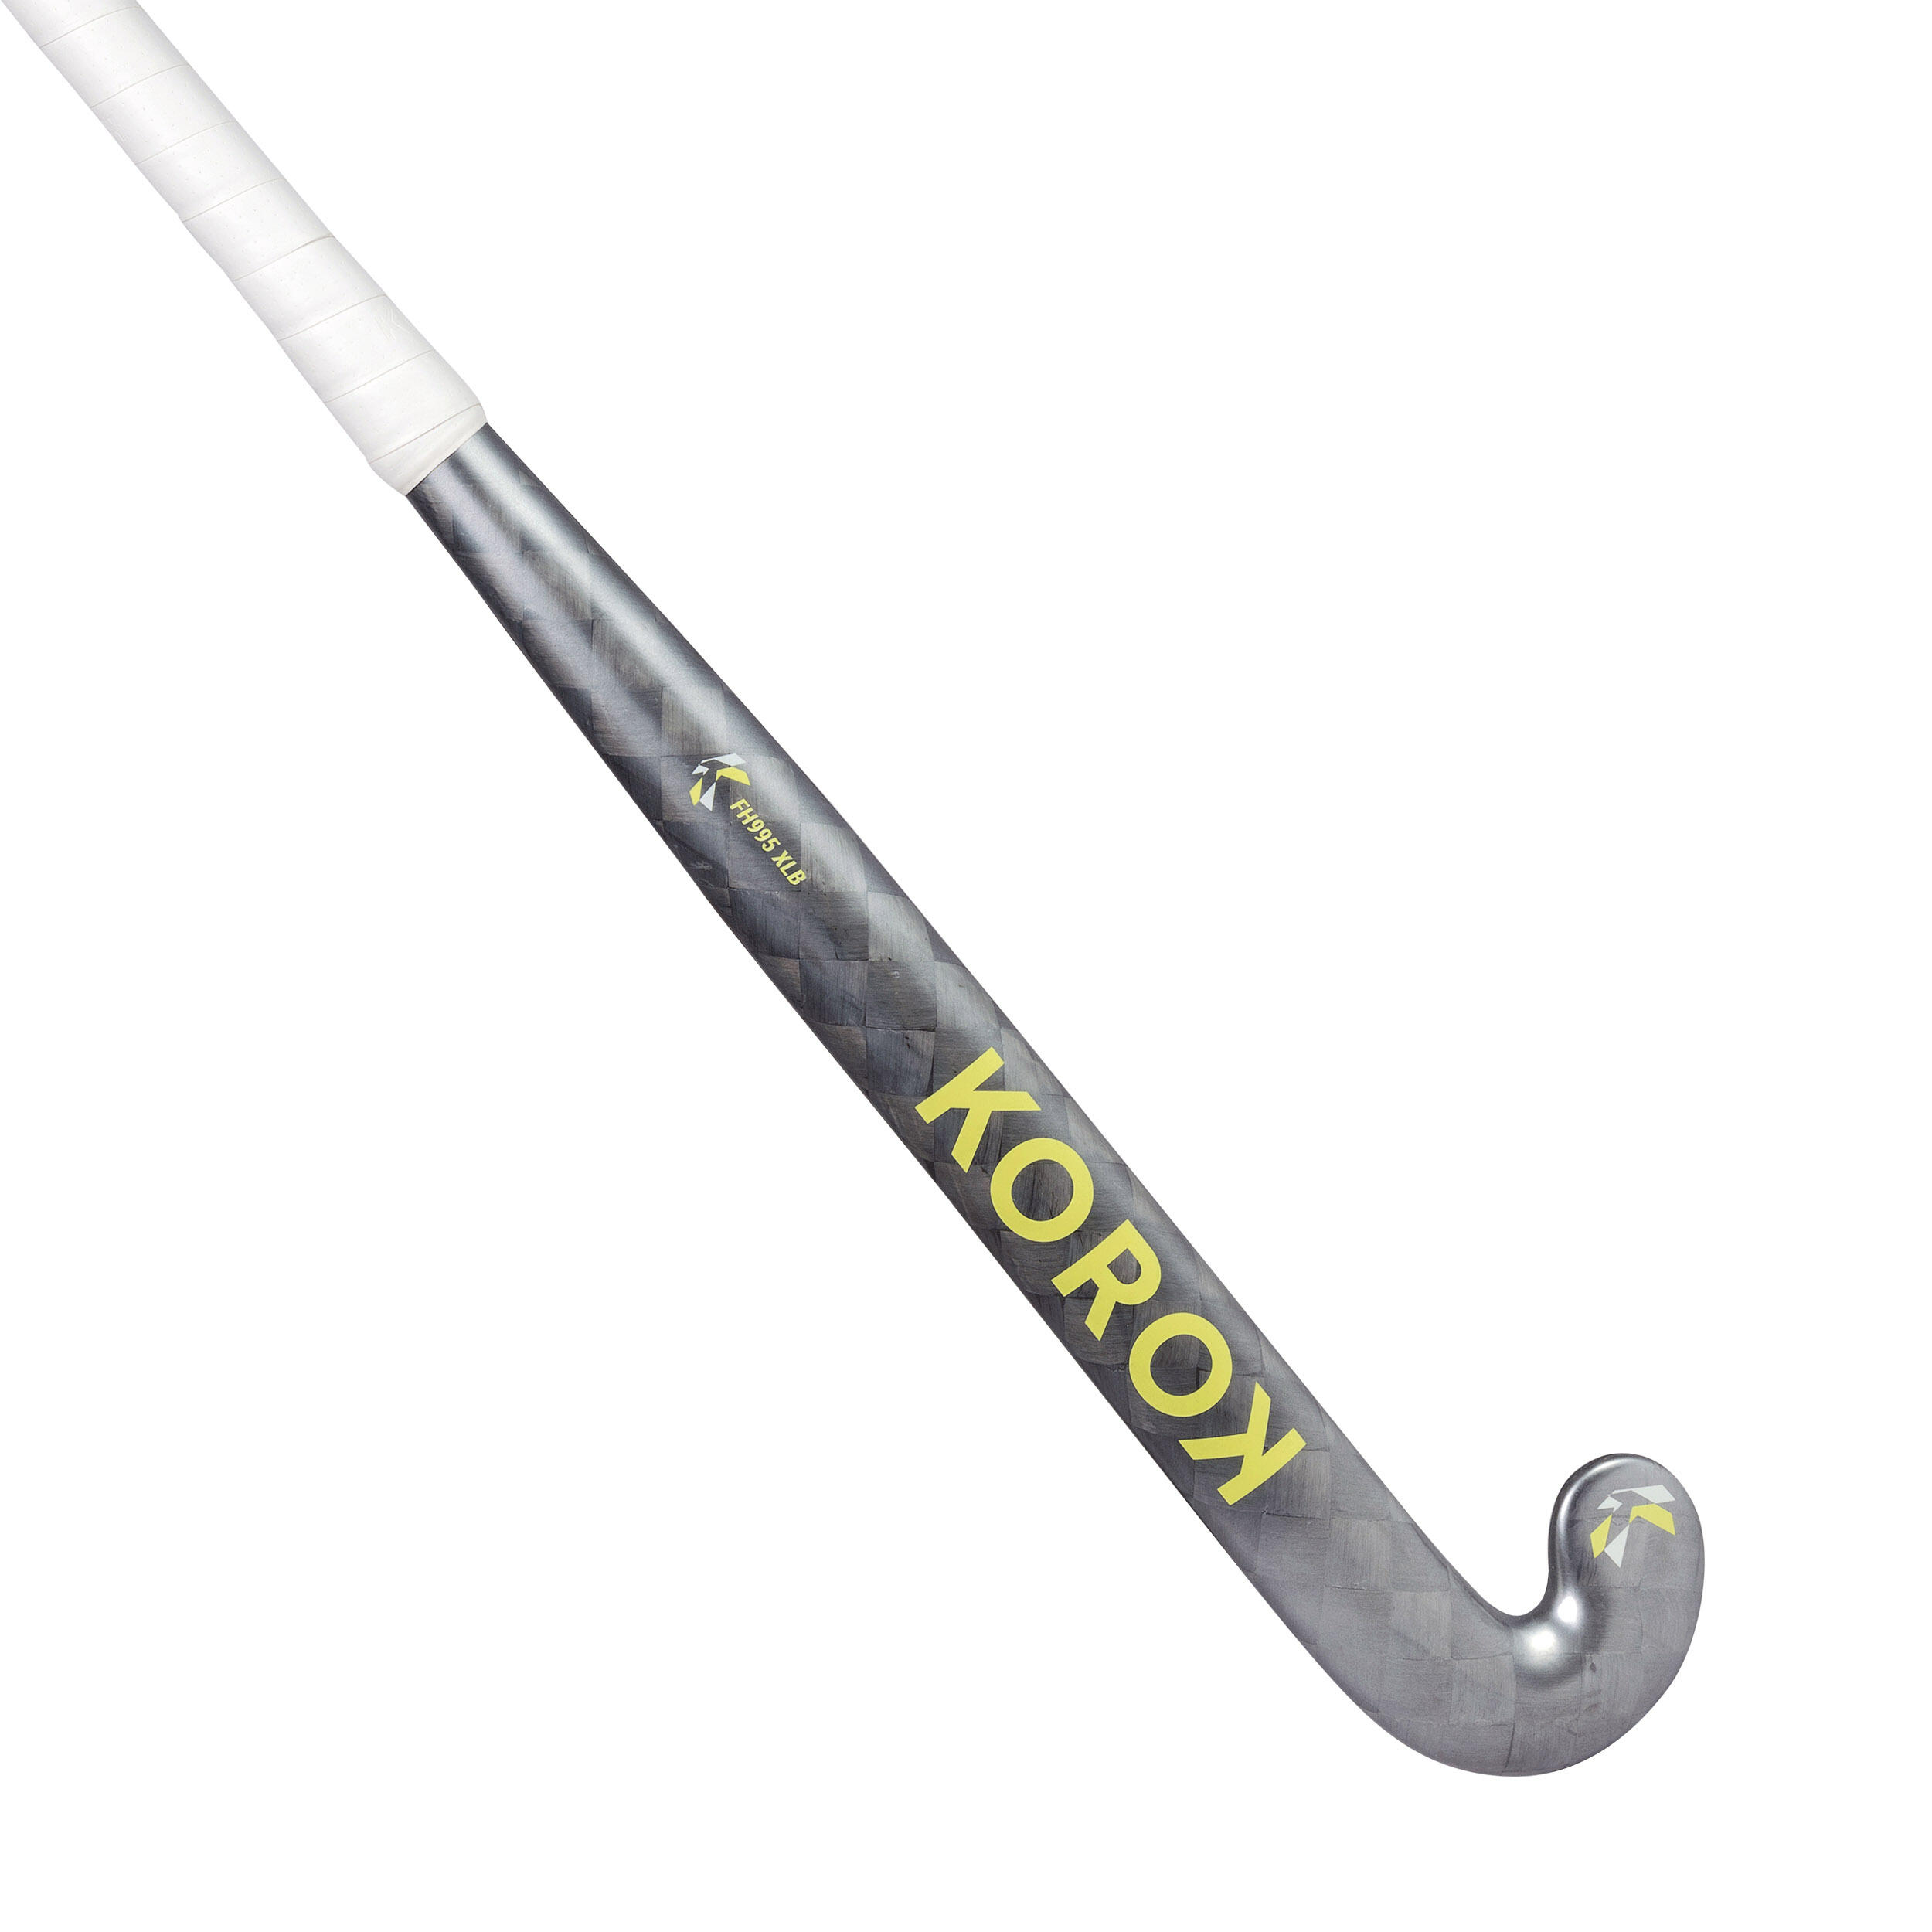 Adult Advanced 95% Carbon Extra Low Bow Field Hockey Stick FH995 - Grey/Yellow 1/12